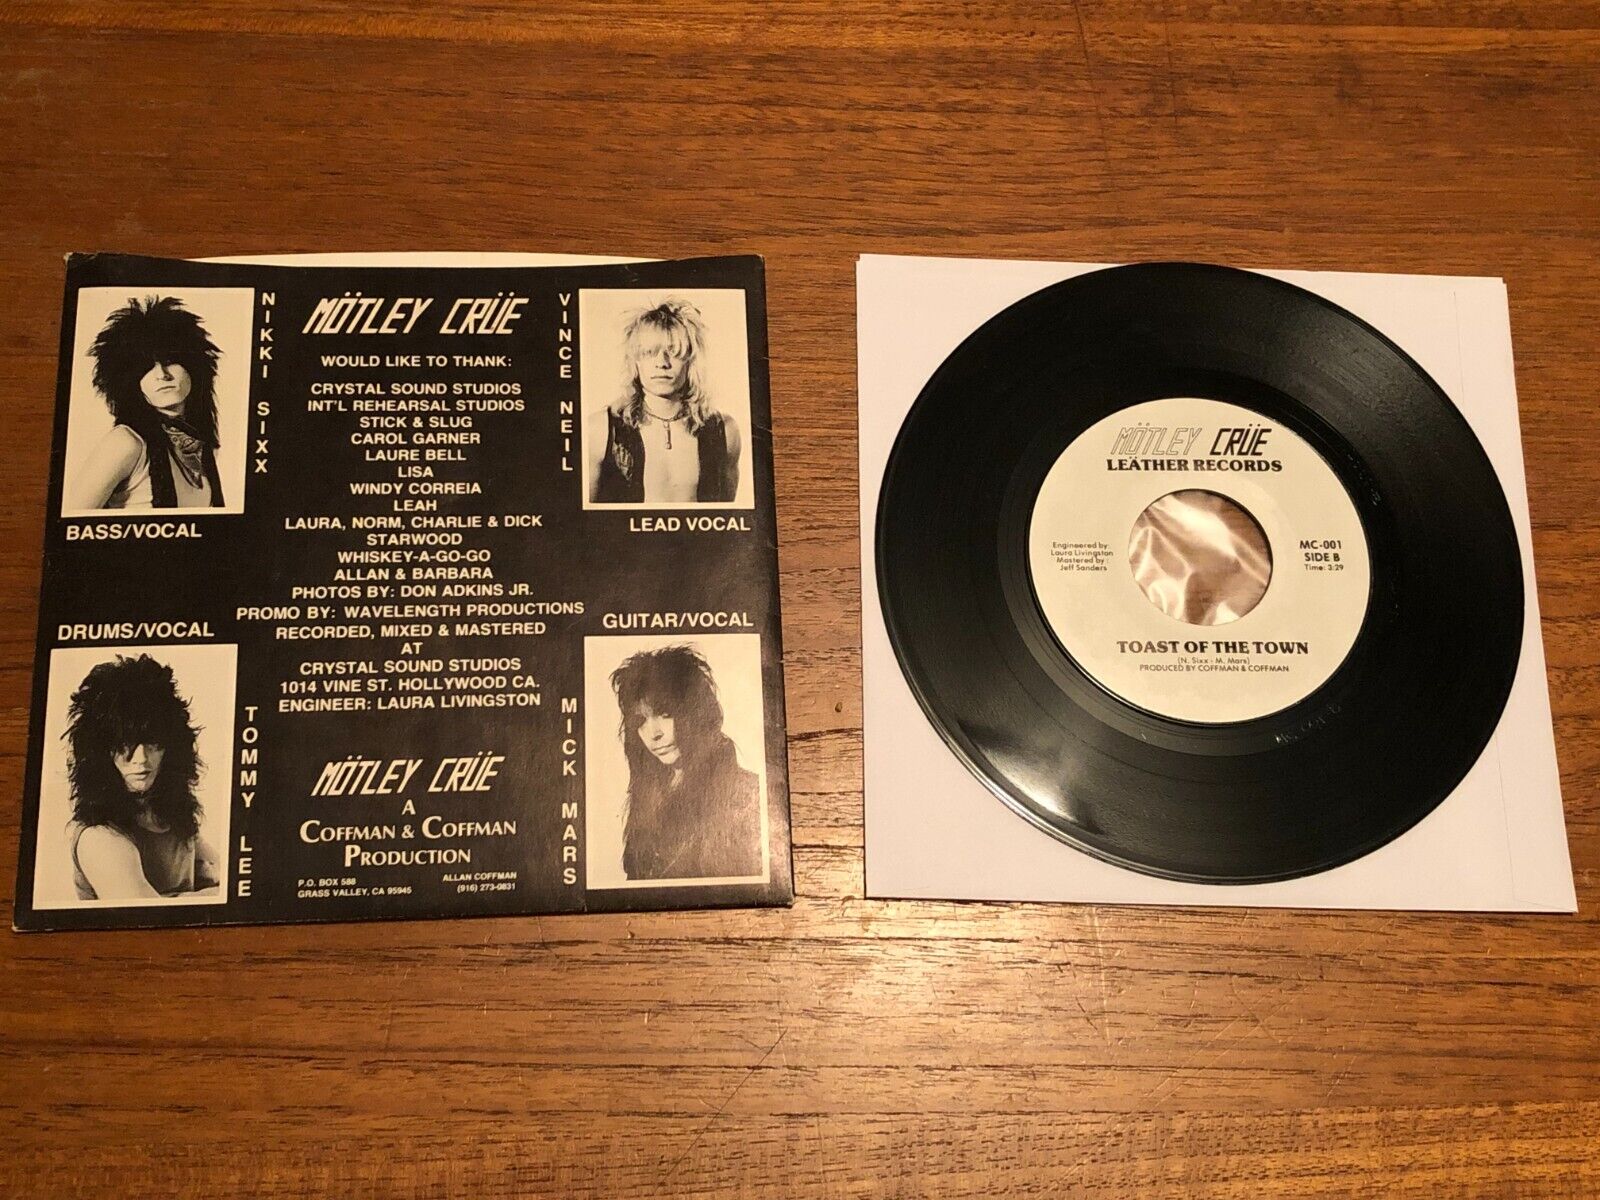 Pic 1 Motley Crue ORIGINAL 7" Stick To Your Guns Leathur Records 1981 ONLY 1,000 MADE